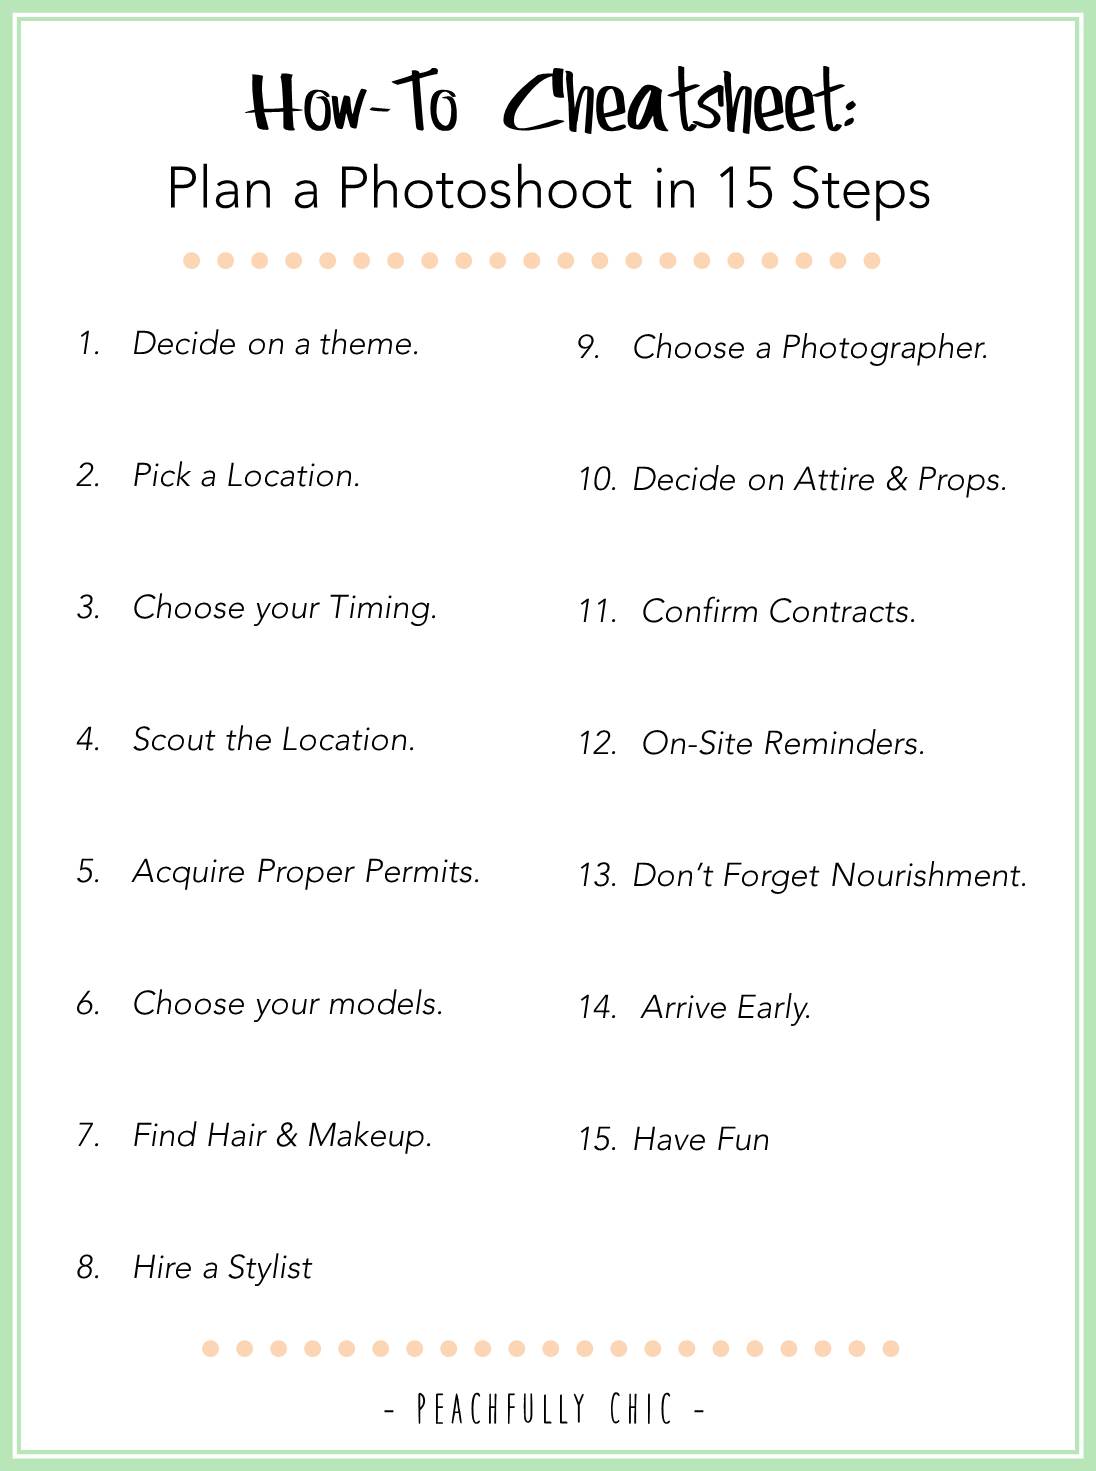 How To Plan a Photoshoot in 15 Steps: Peachfully Chic